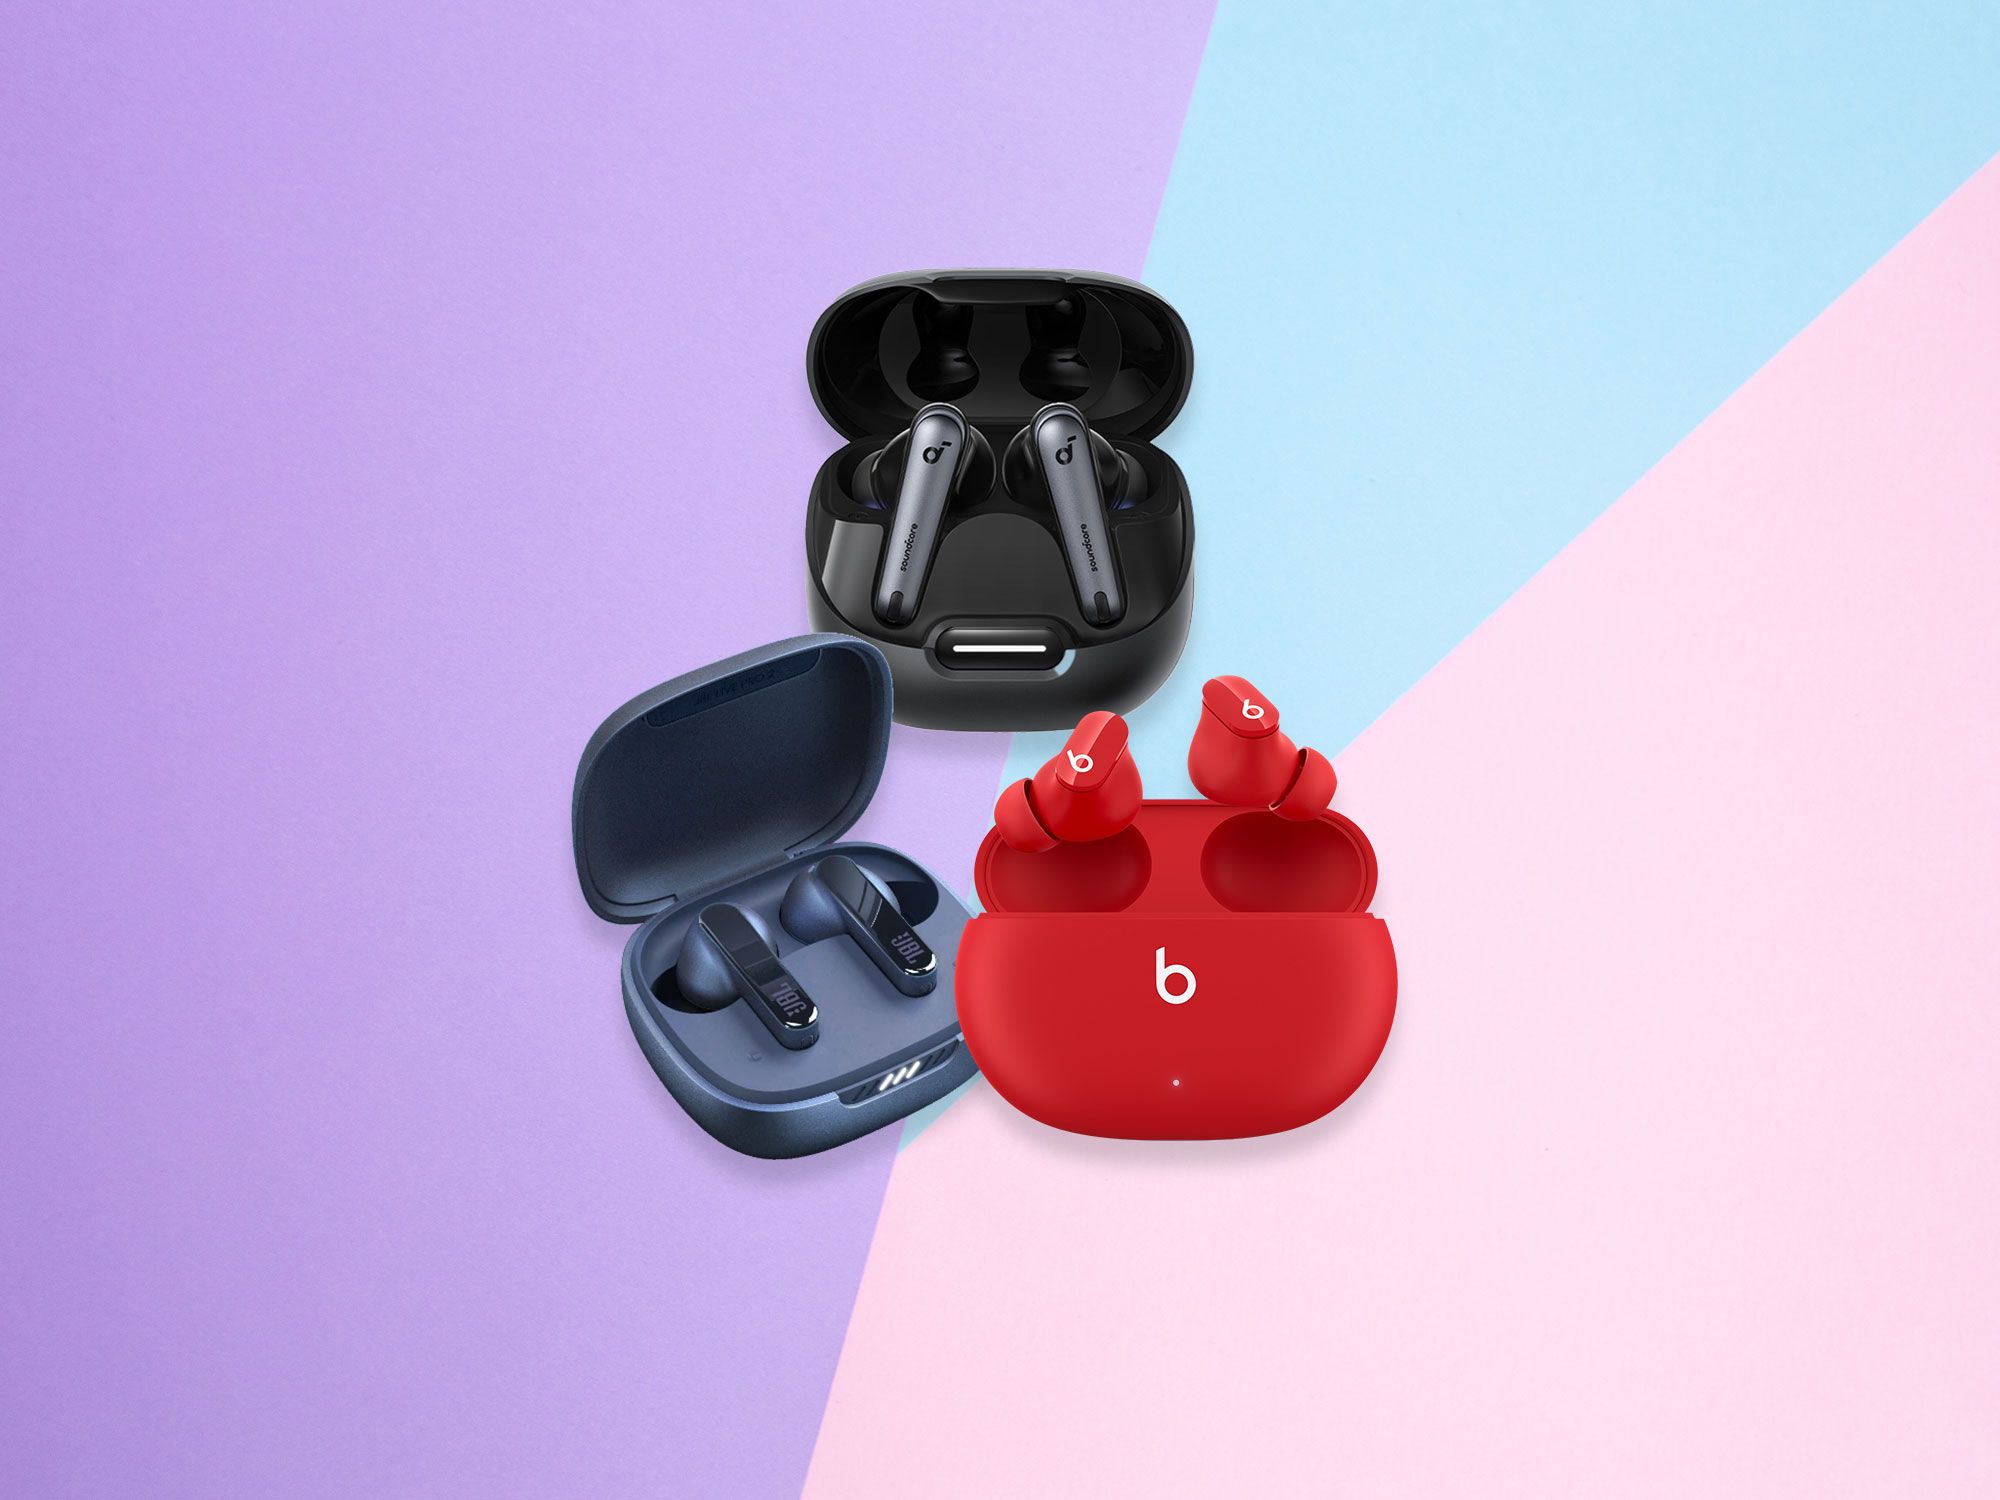 JBL Launches 2 Apple AirPods Earbuds Competitors with Siri Support